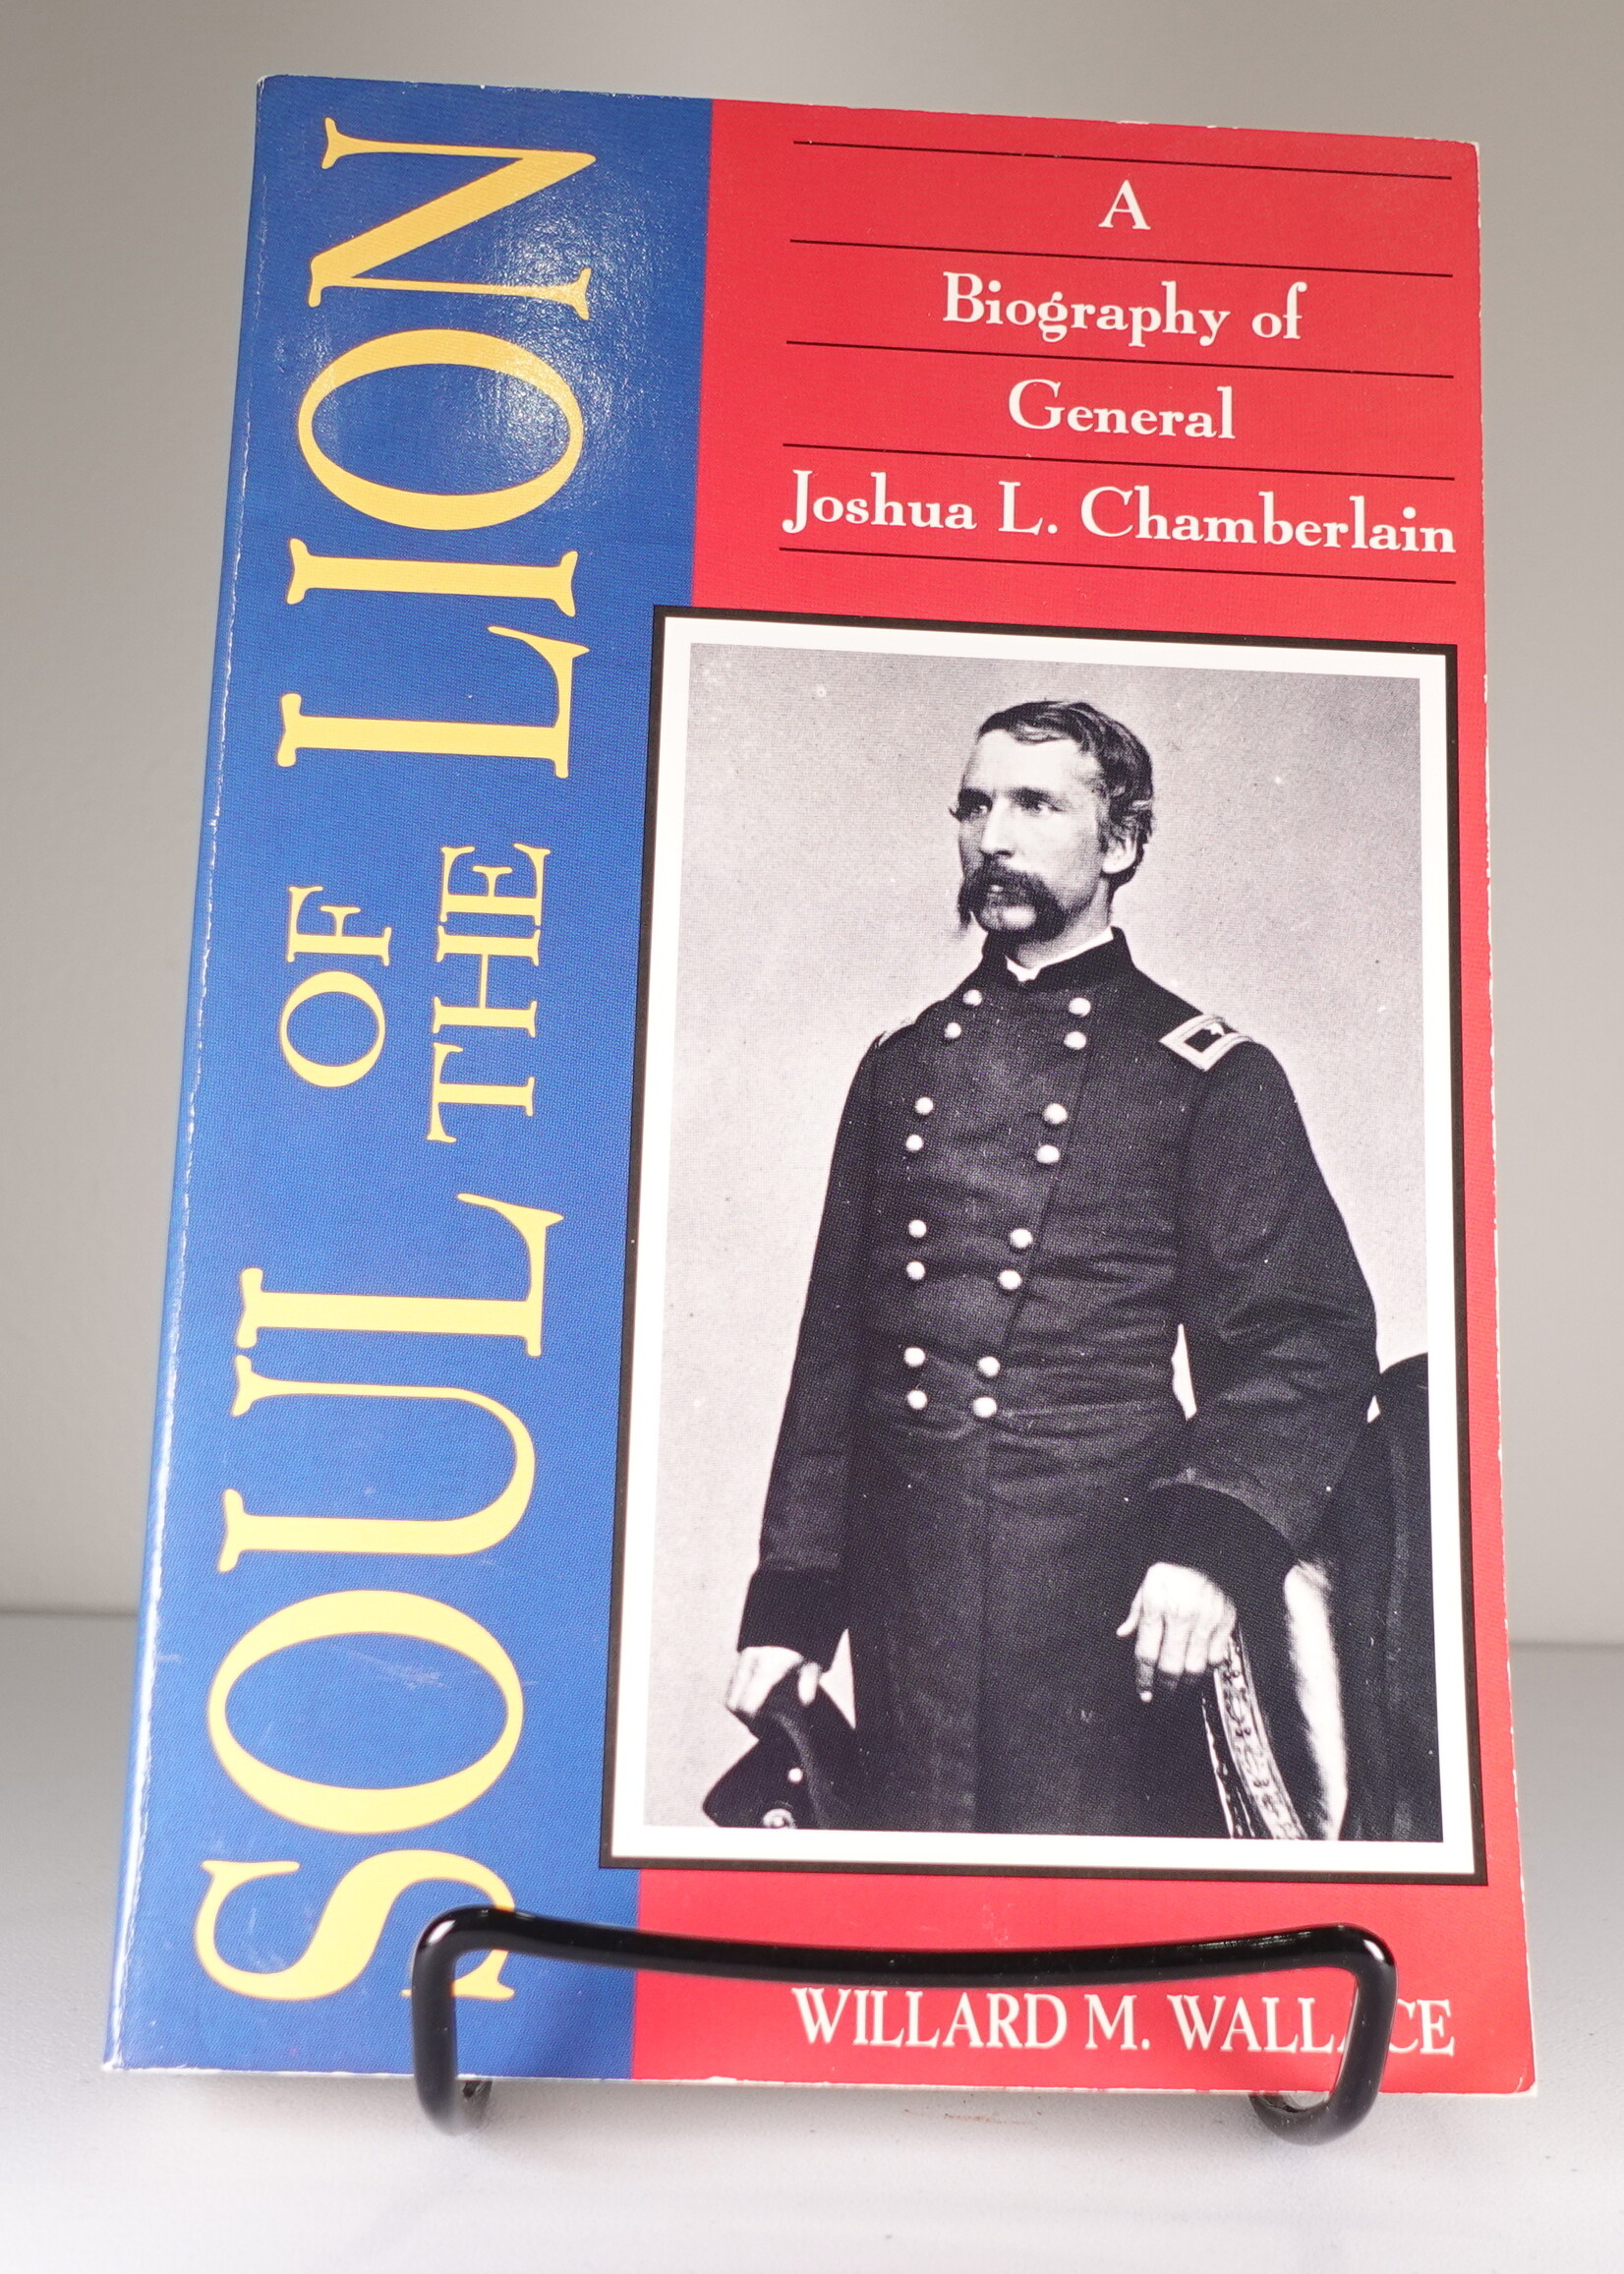 Stan Clark Military Books Soul of the Lion: A Biography of General Joshua L. Chamberlain